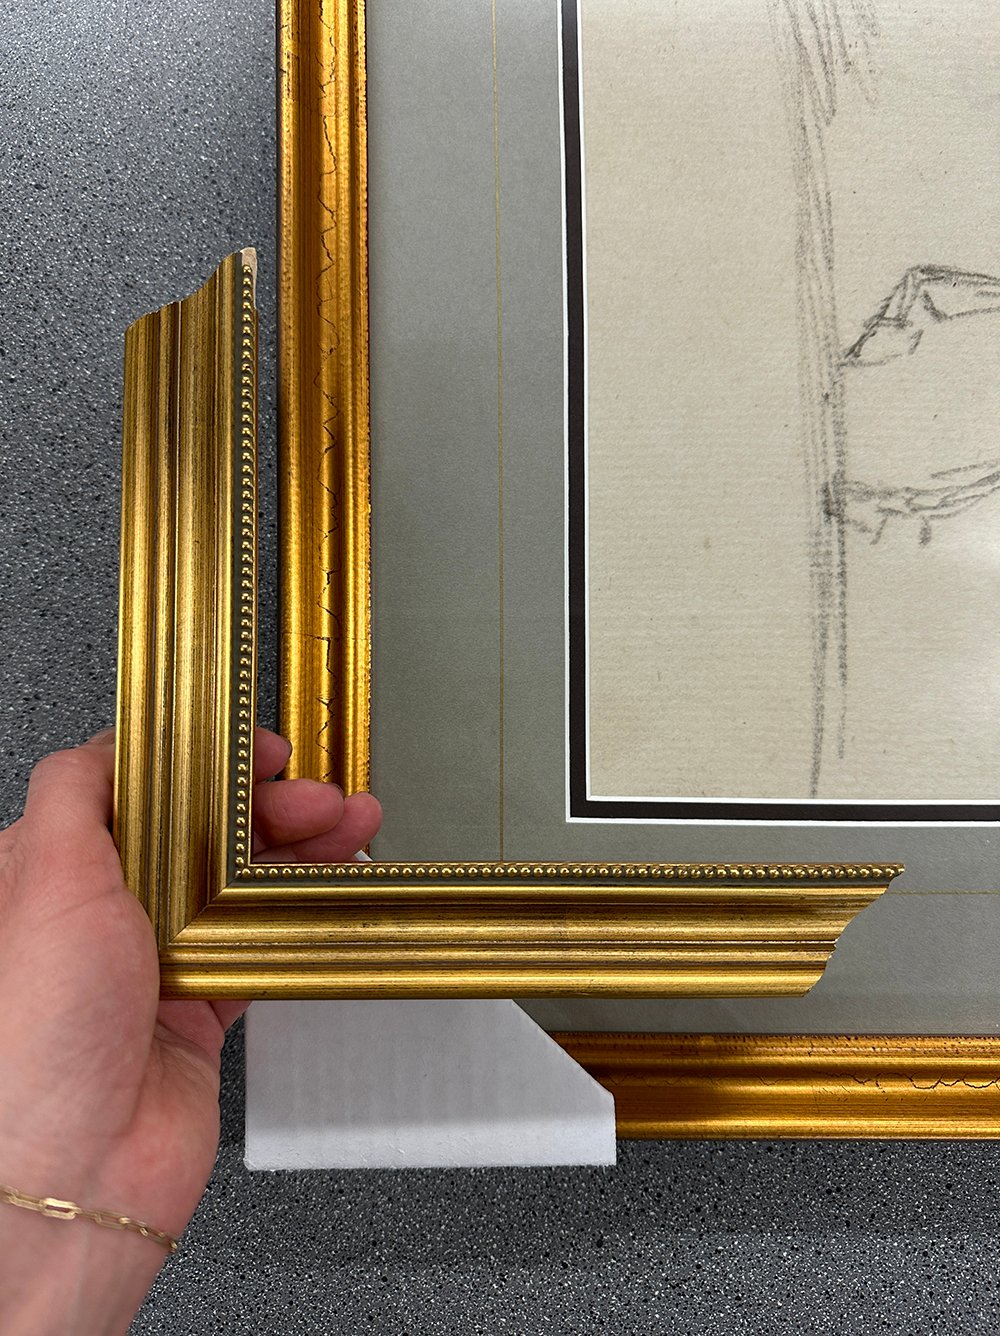 Custom Framing Art Cost and Frame Selection Tips - roomfortuesday.com